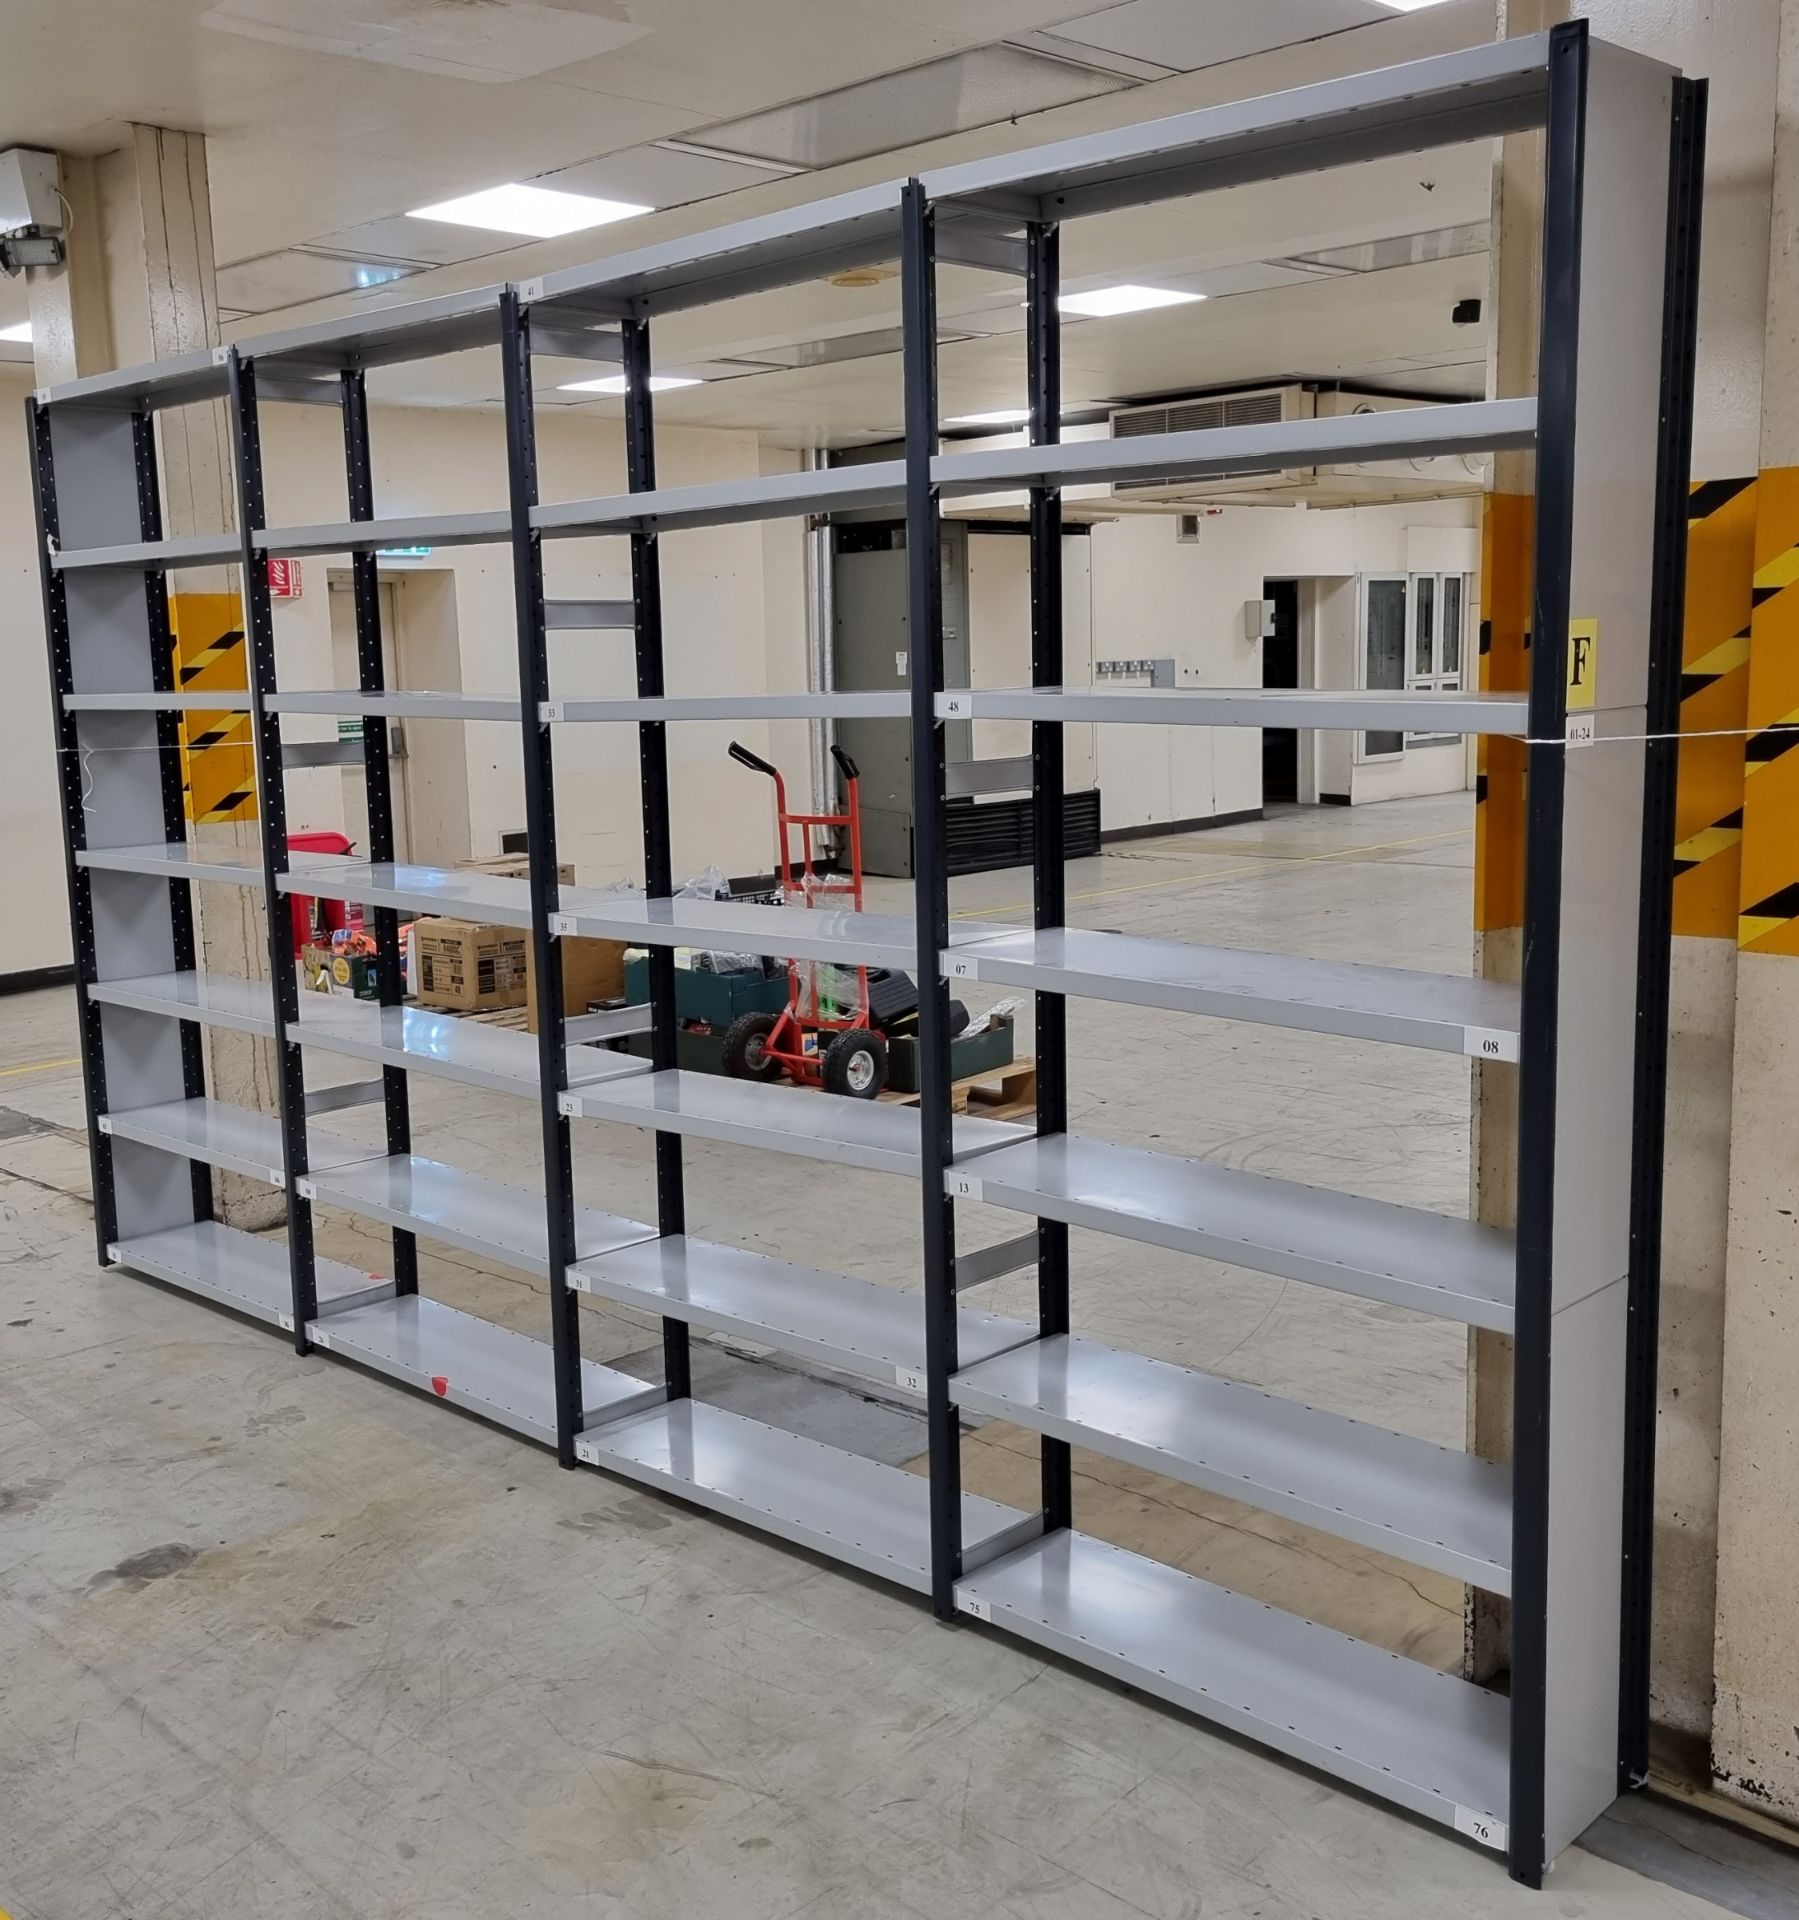 2x sets of Industrial 4 bay shelving assemblies - see description for details - Image 2 of 6